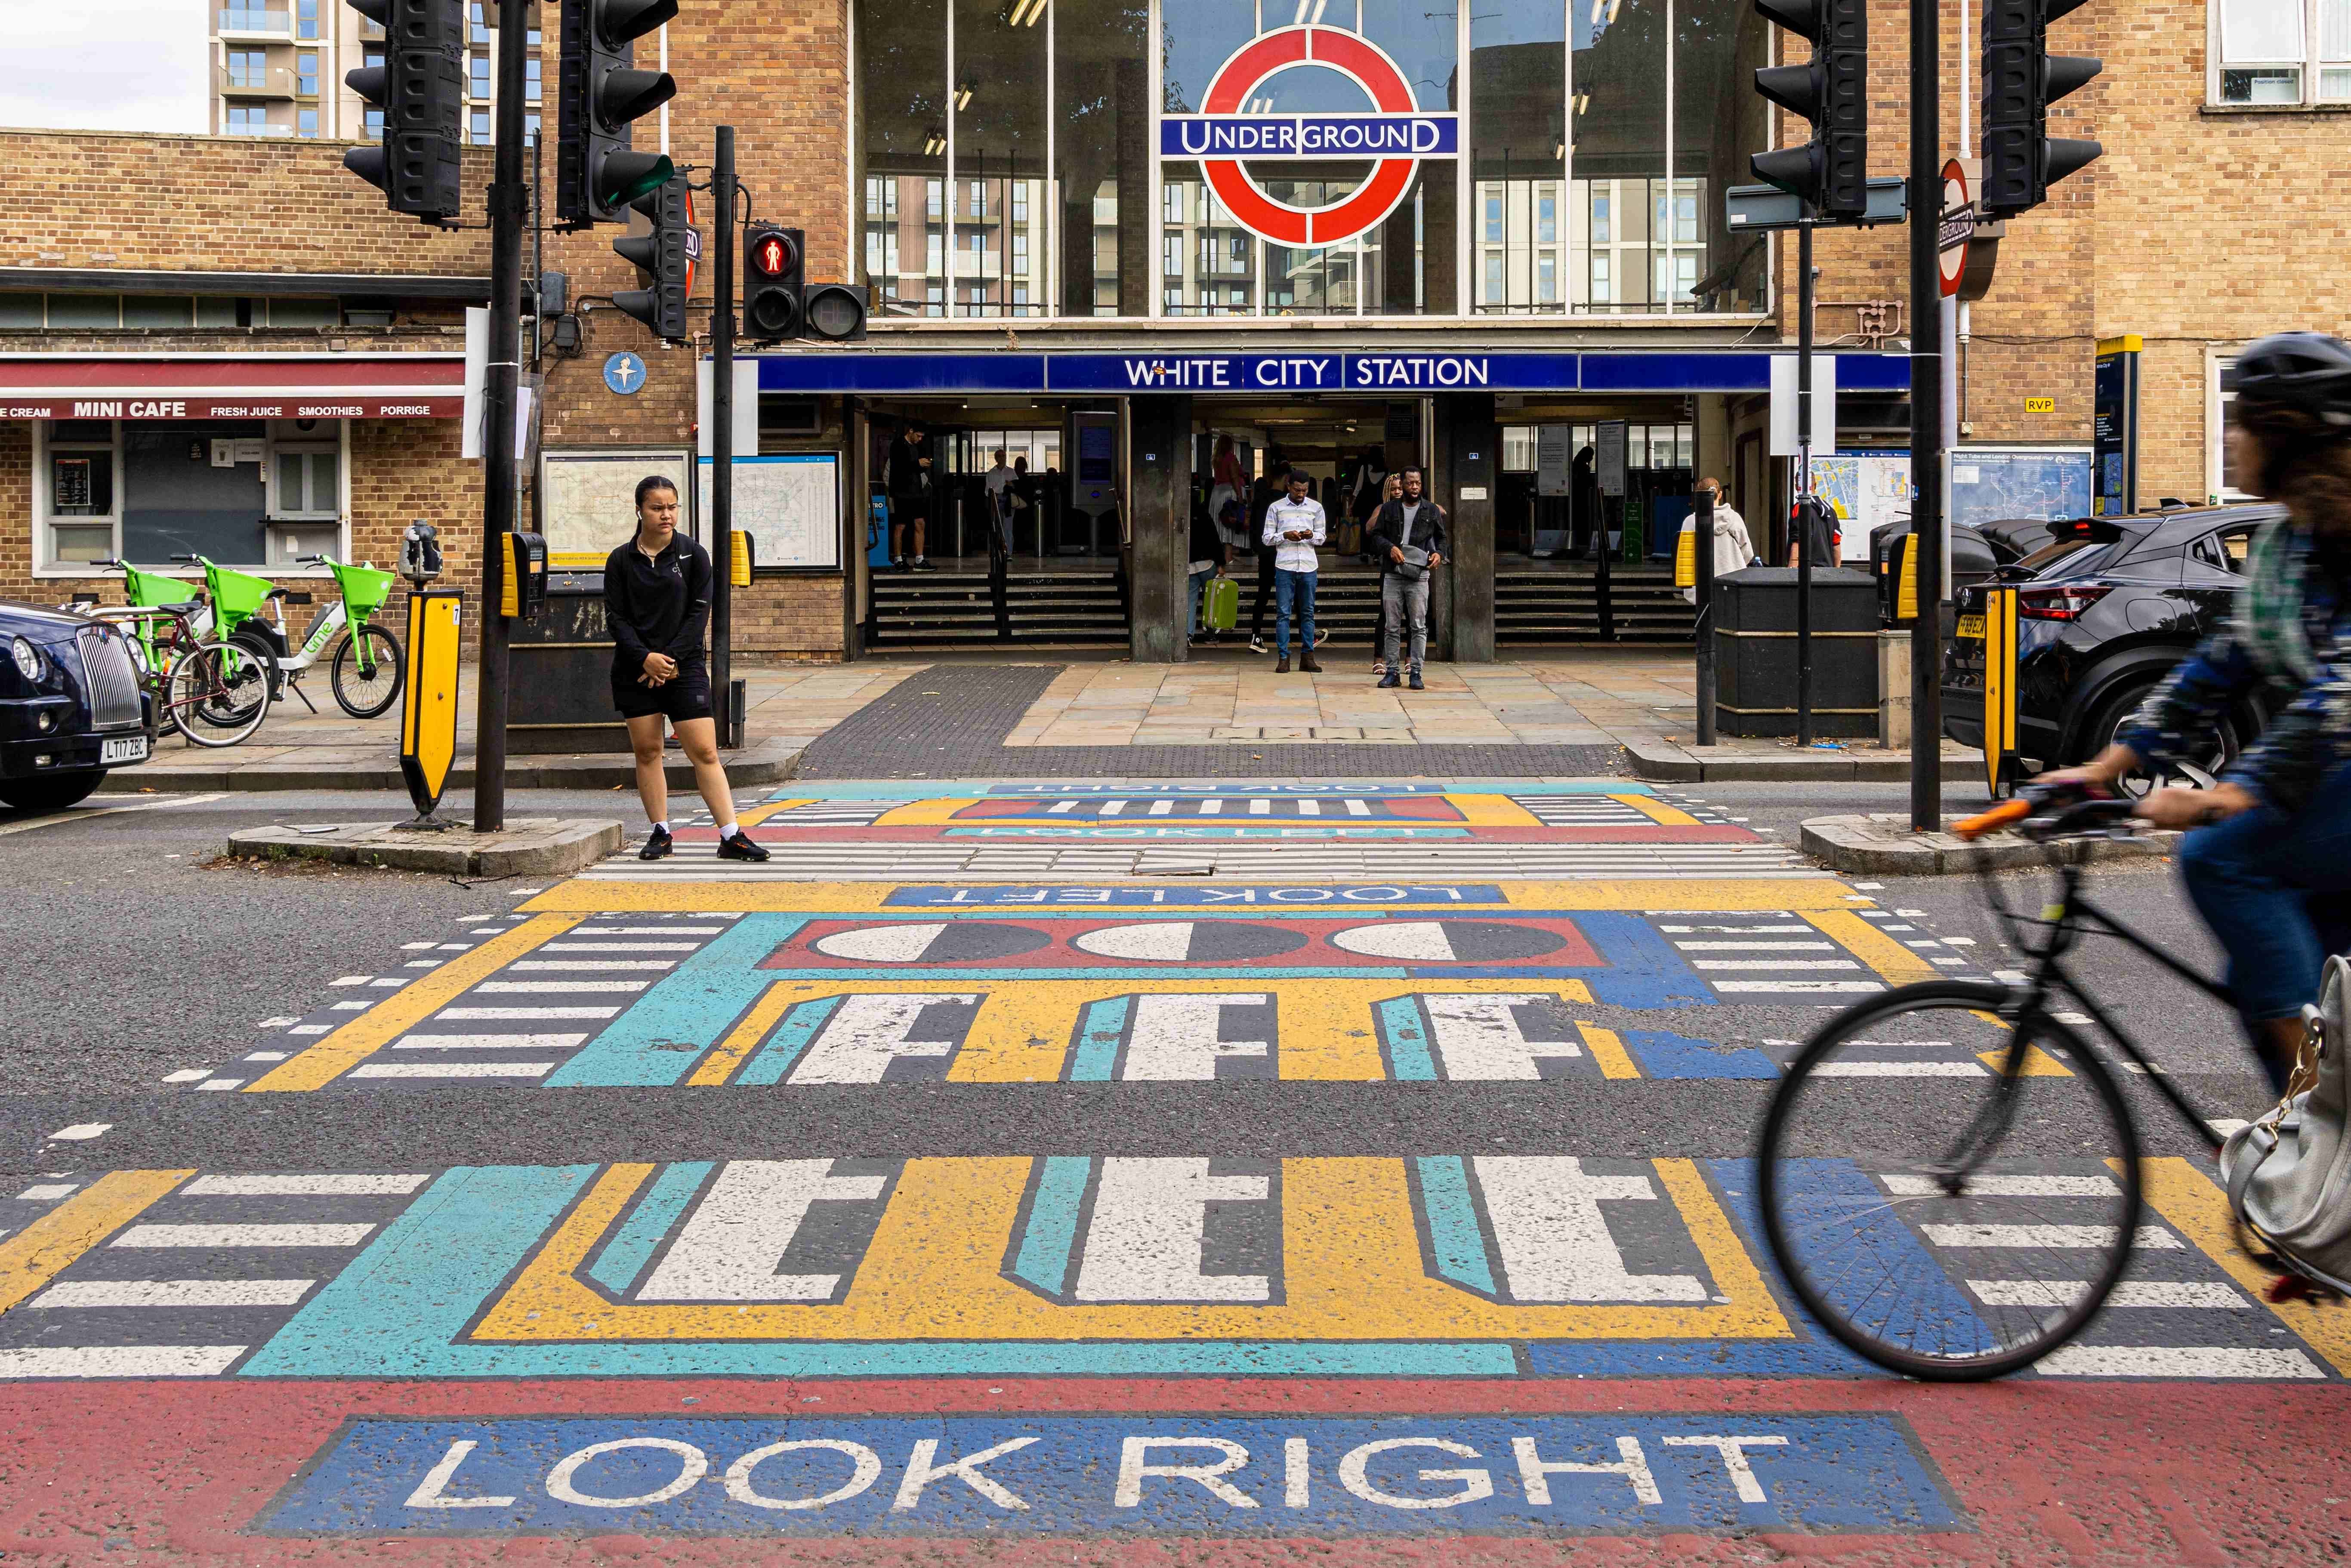 pedestrian crossing in front of White City tube station